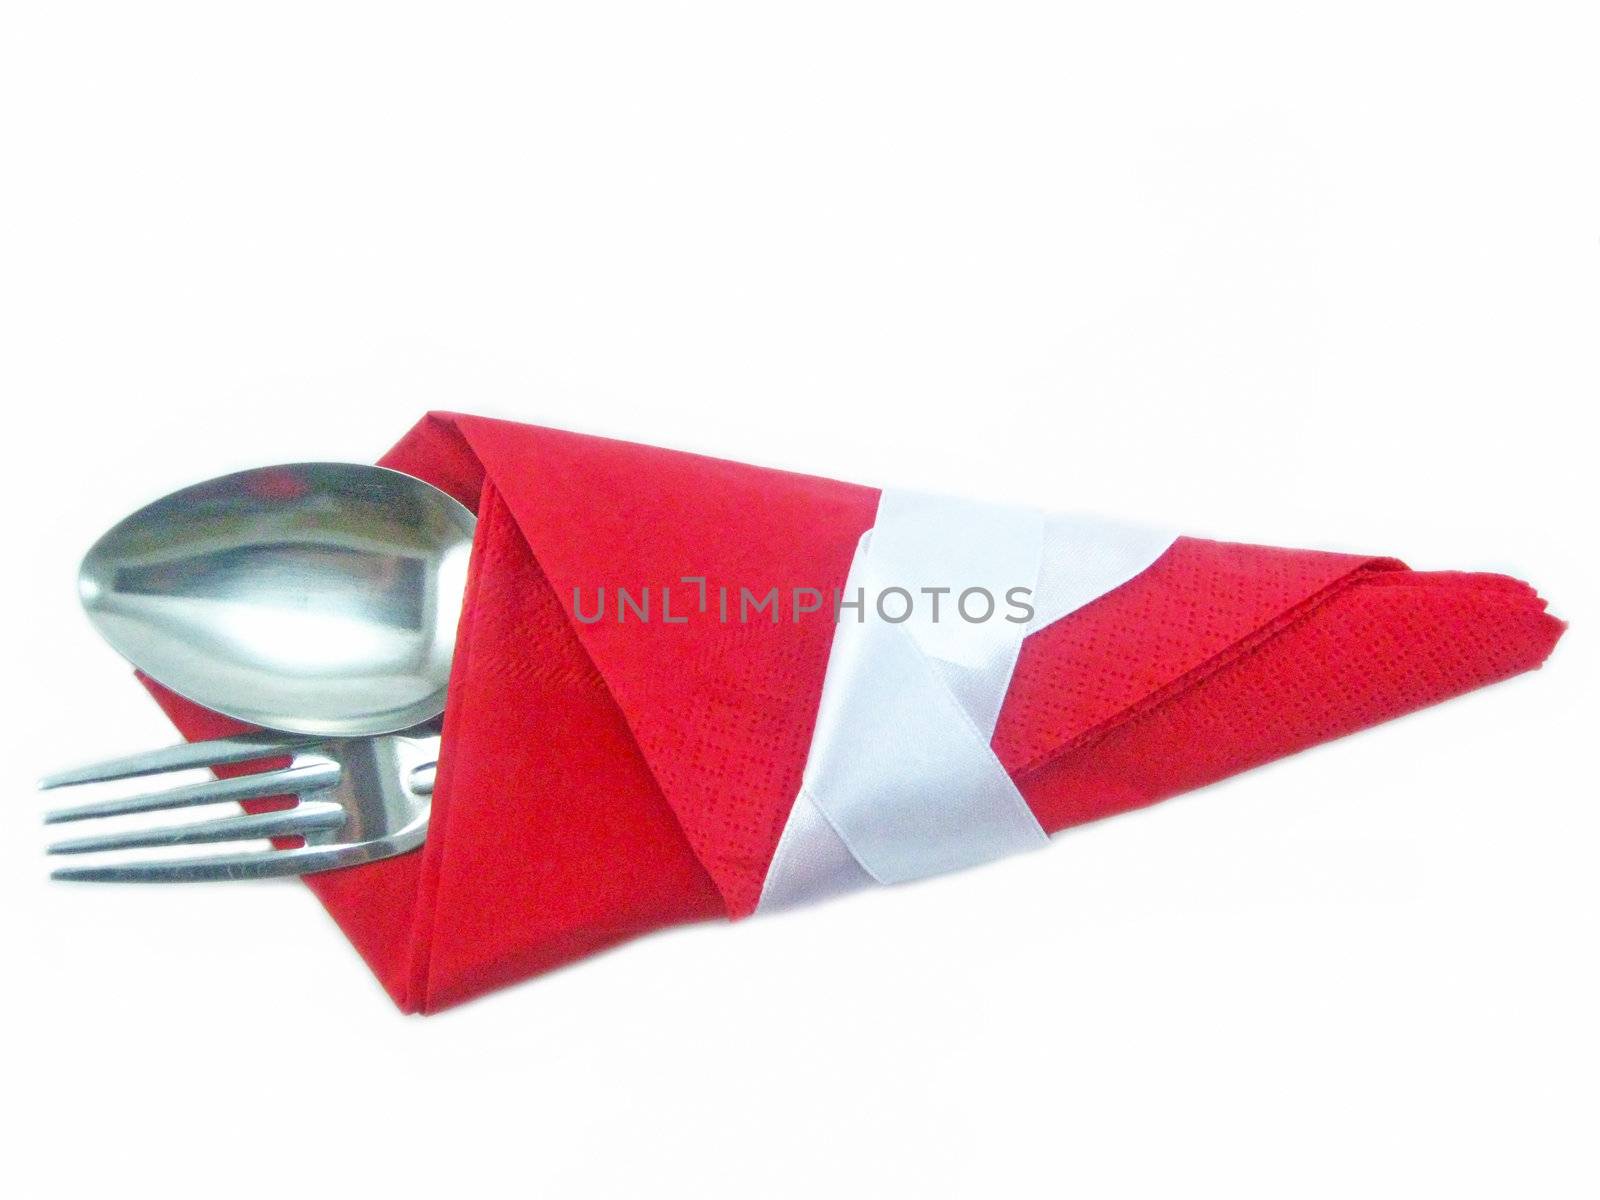 Spoon and plug in a red napkin